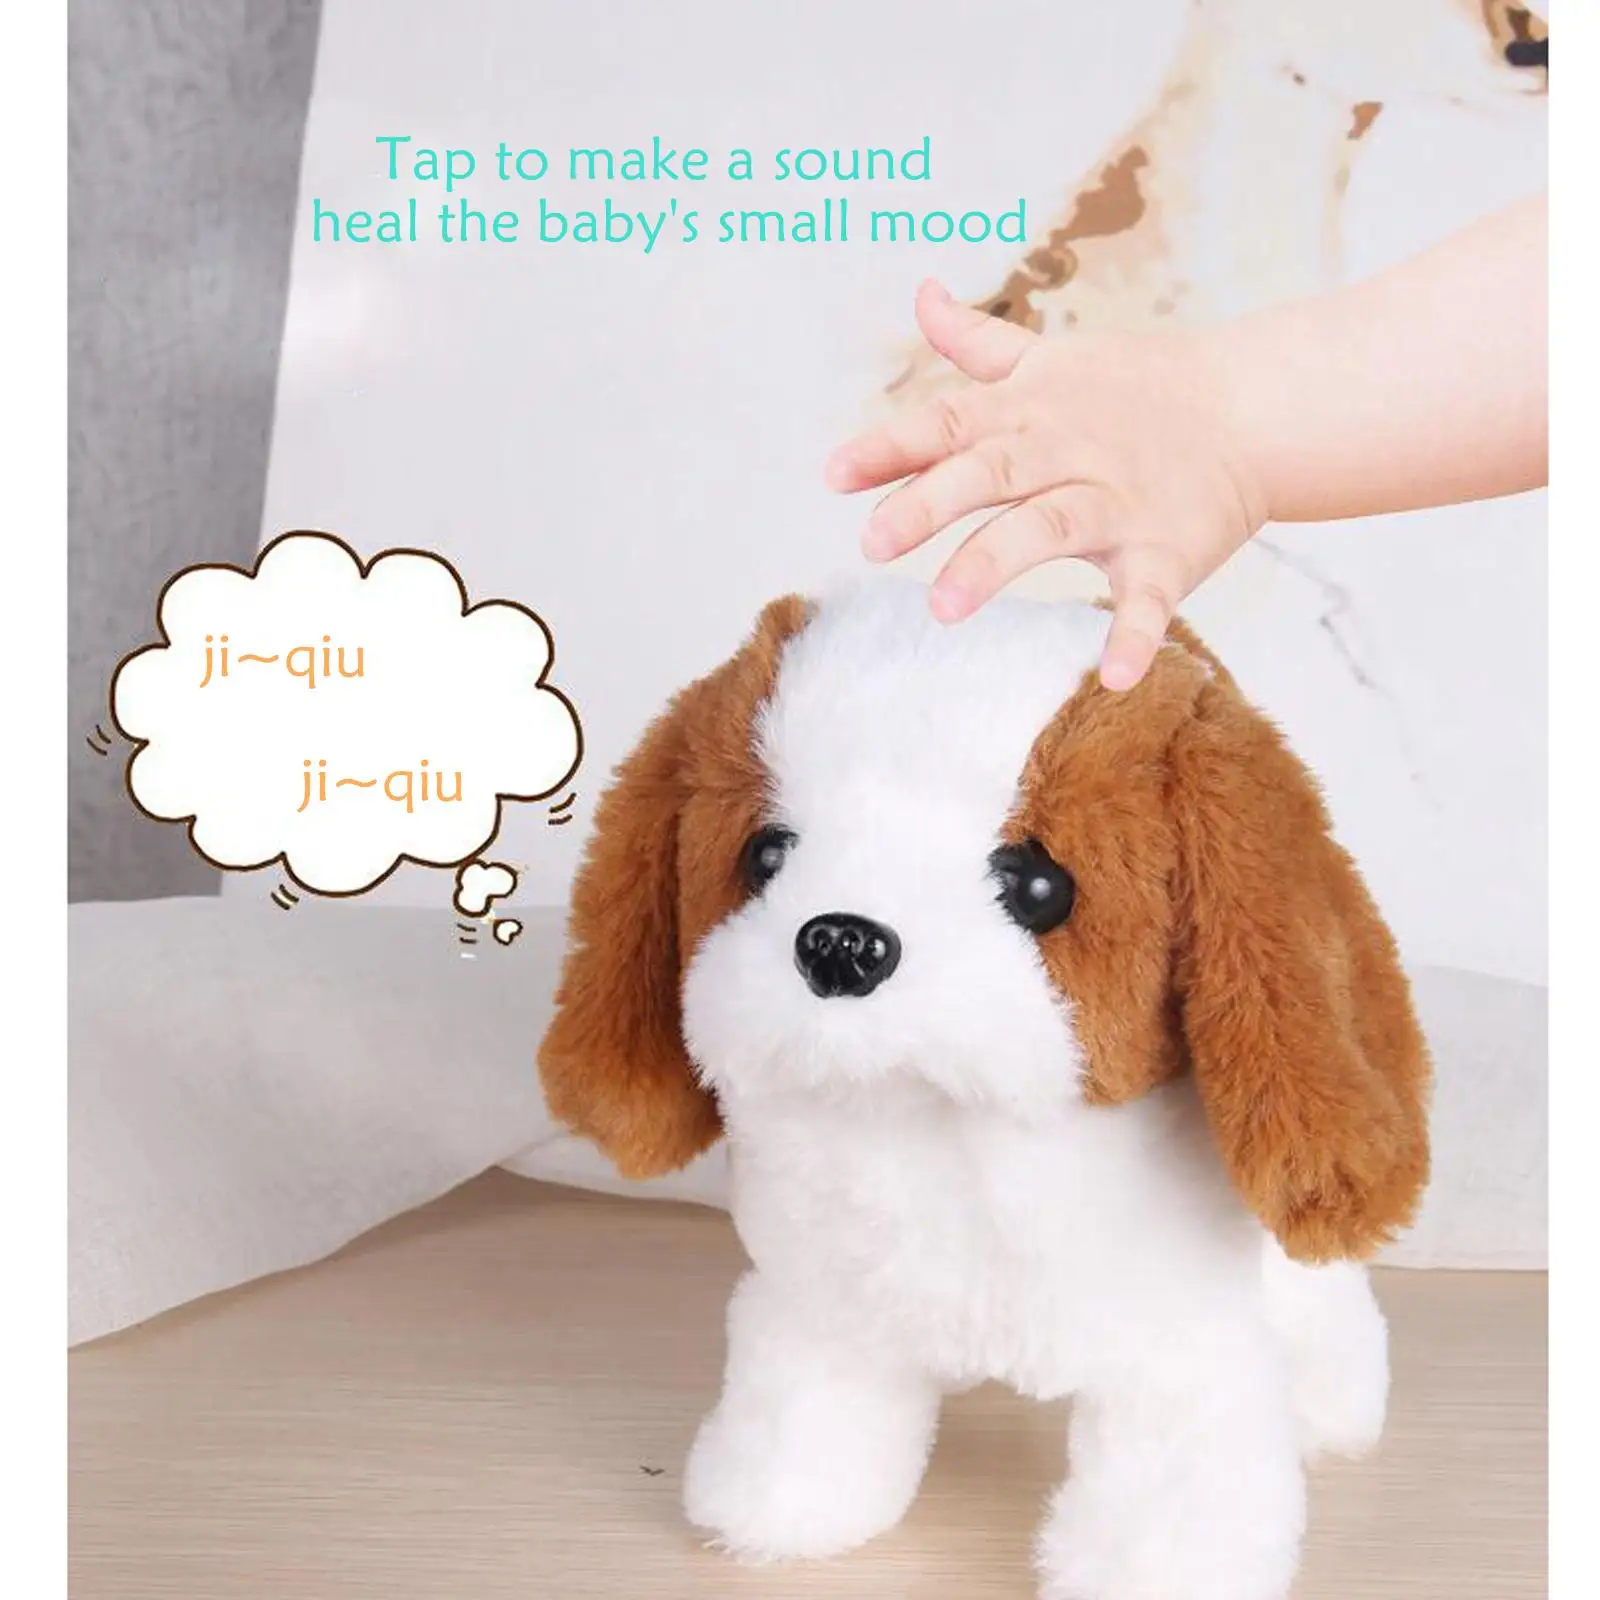 Electronic Plush Dog  Tail Wagging  Animal for Children, Toddlers, Birthday Gift, Play House Stuff, for Kids